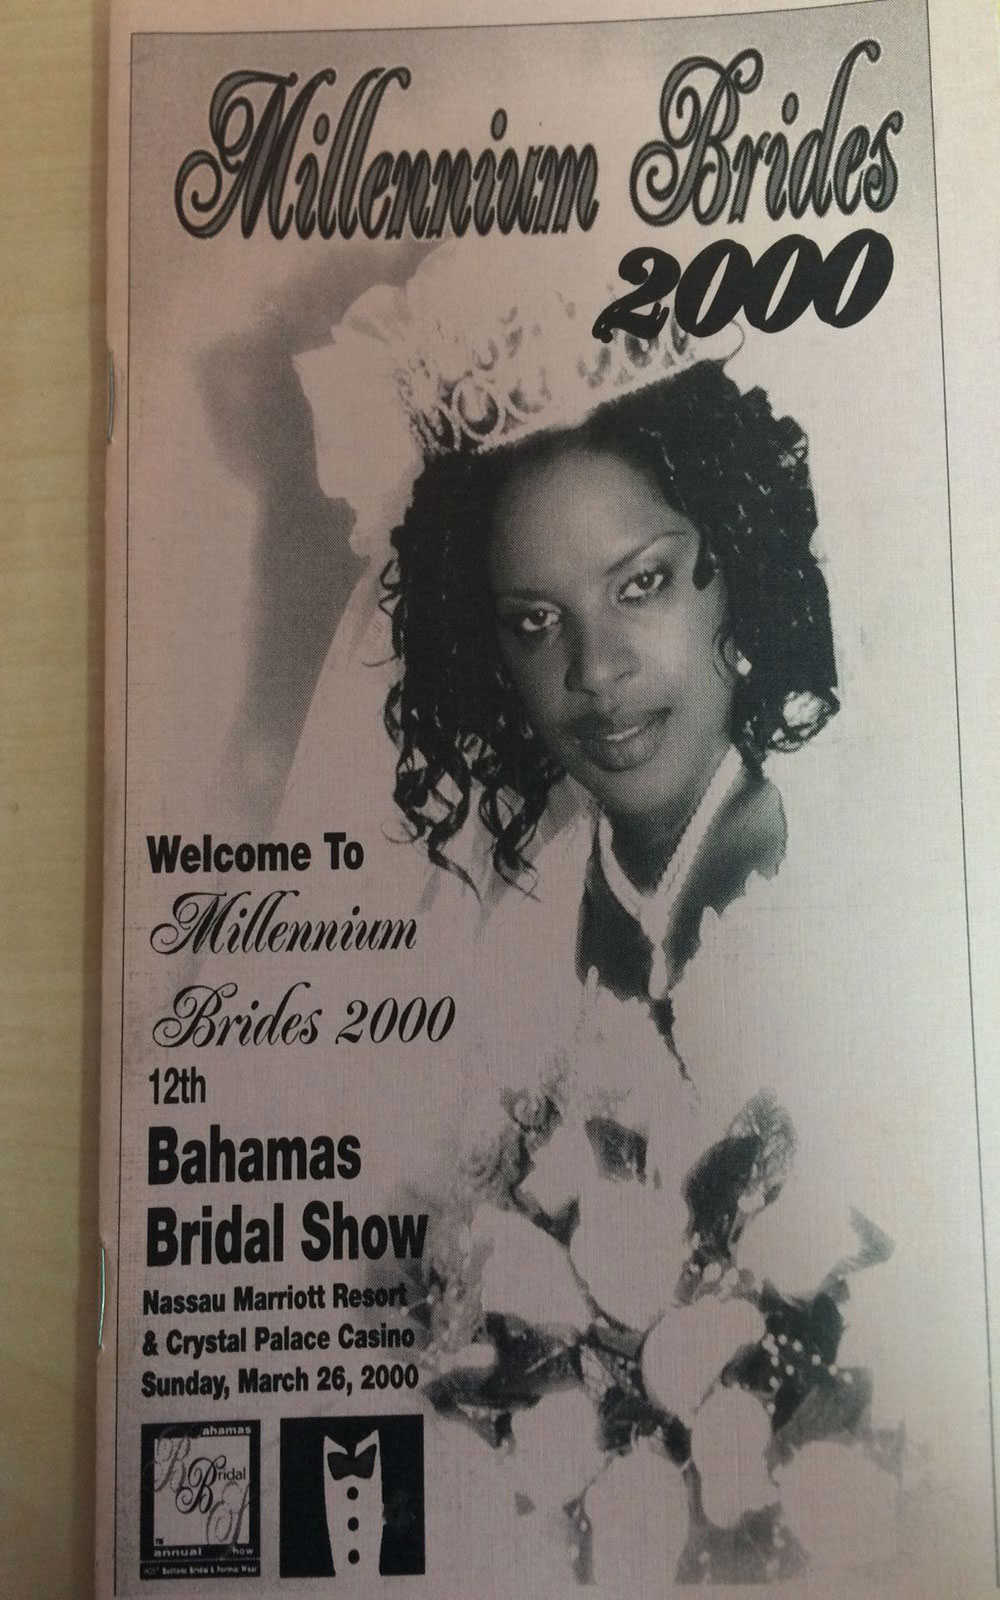 The Wedding Guide 2000